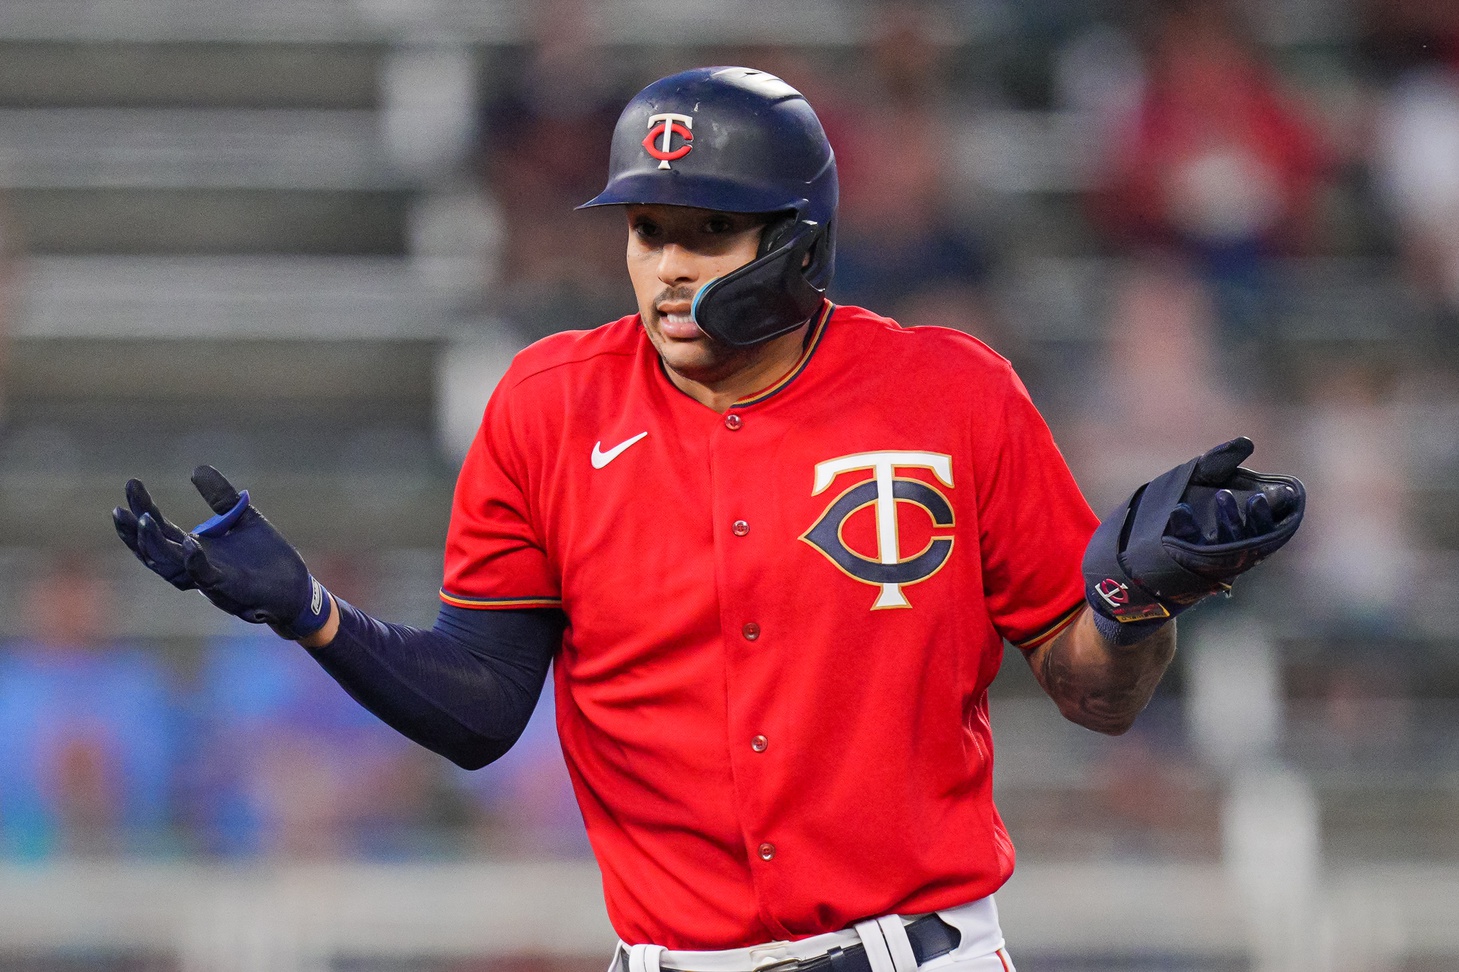 How do experts think the Minnesota Twins will stack up this year